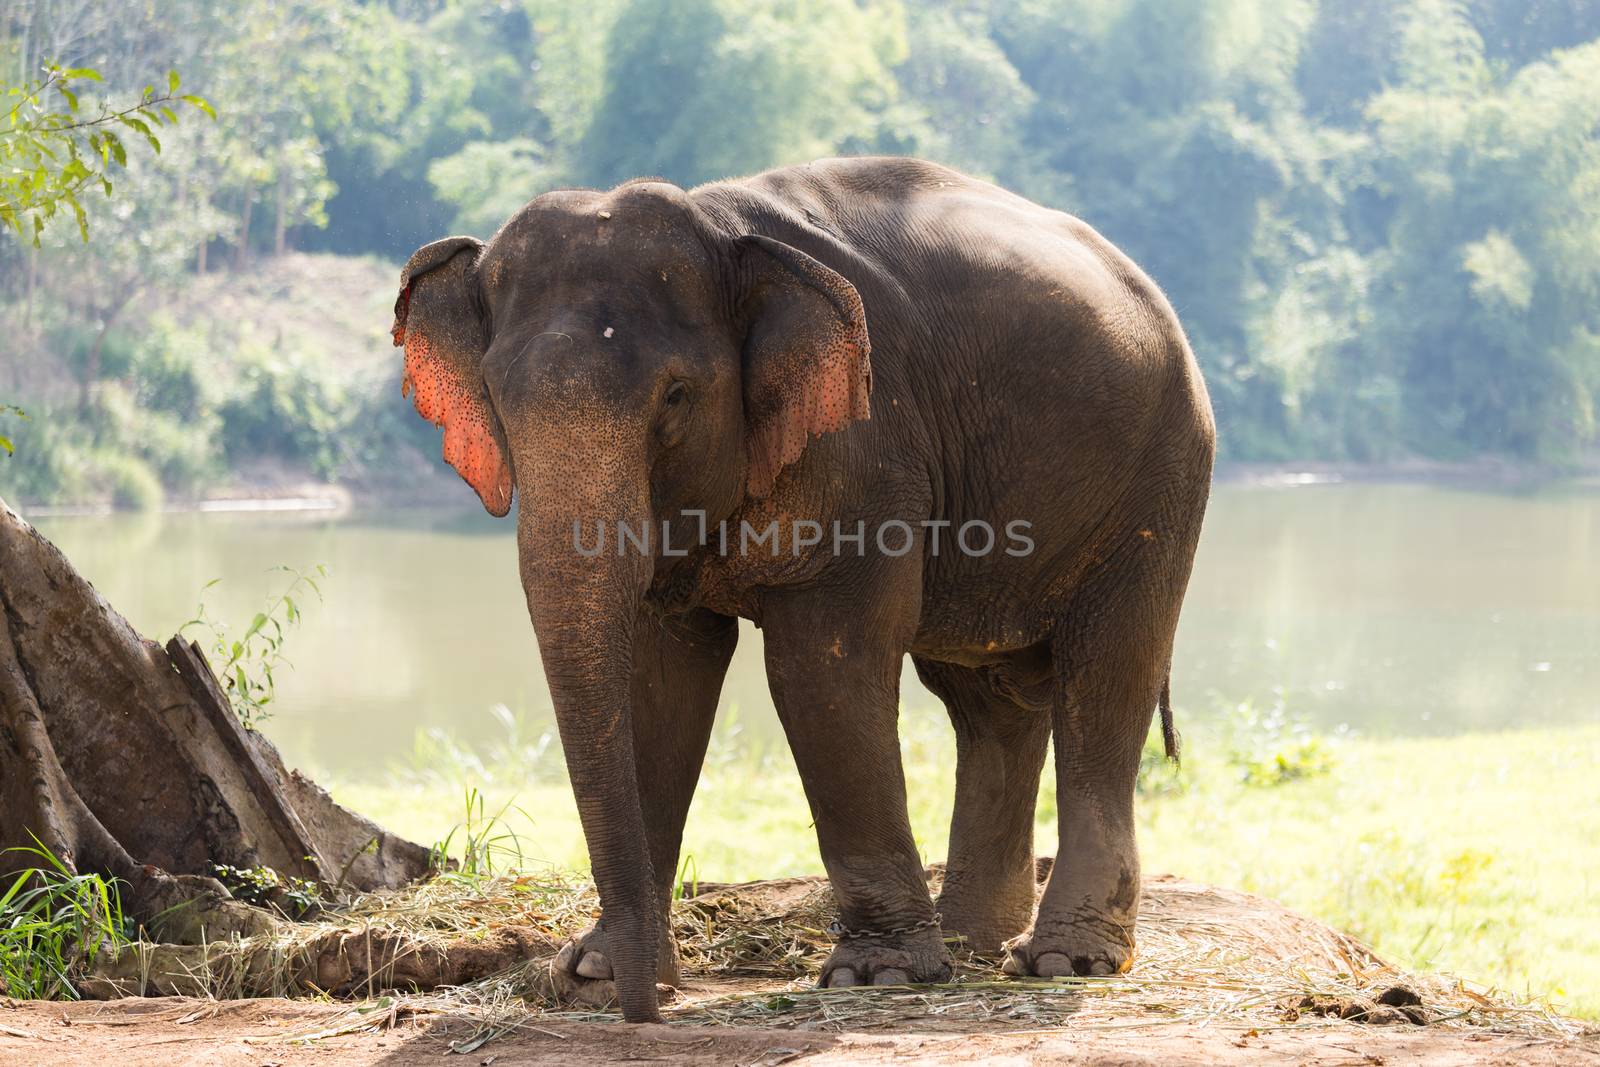 Elephant standing under tree backlit by river in Laos elephant sanctuary by kgboxford